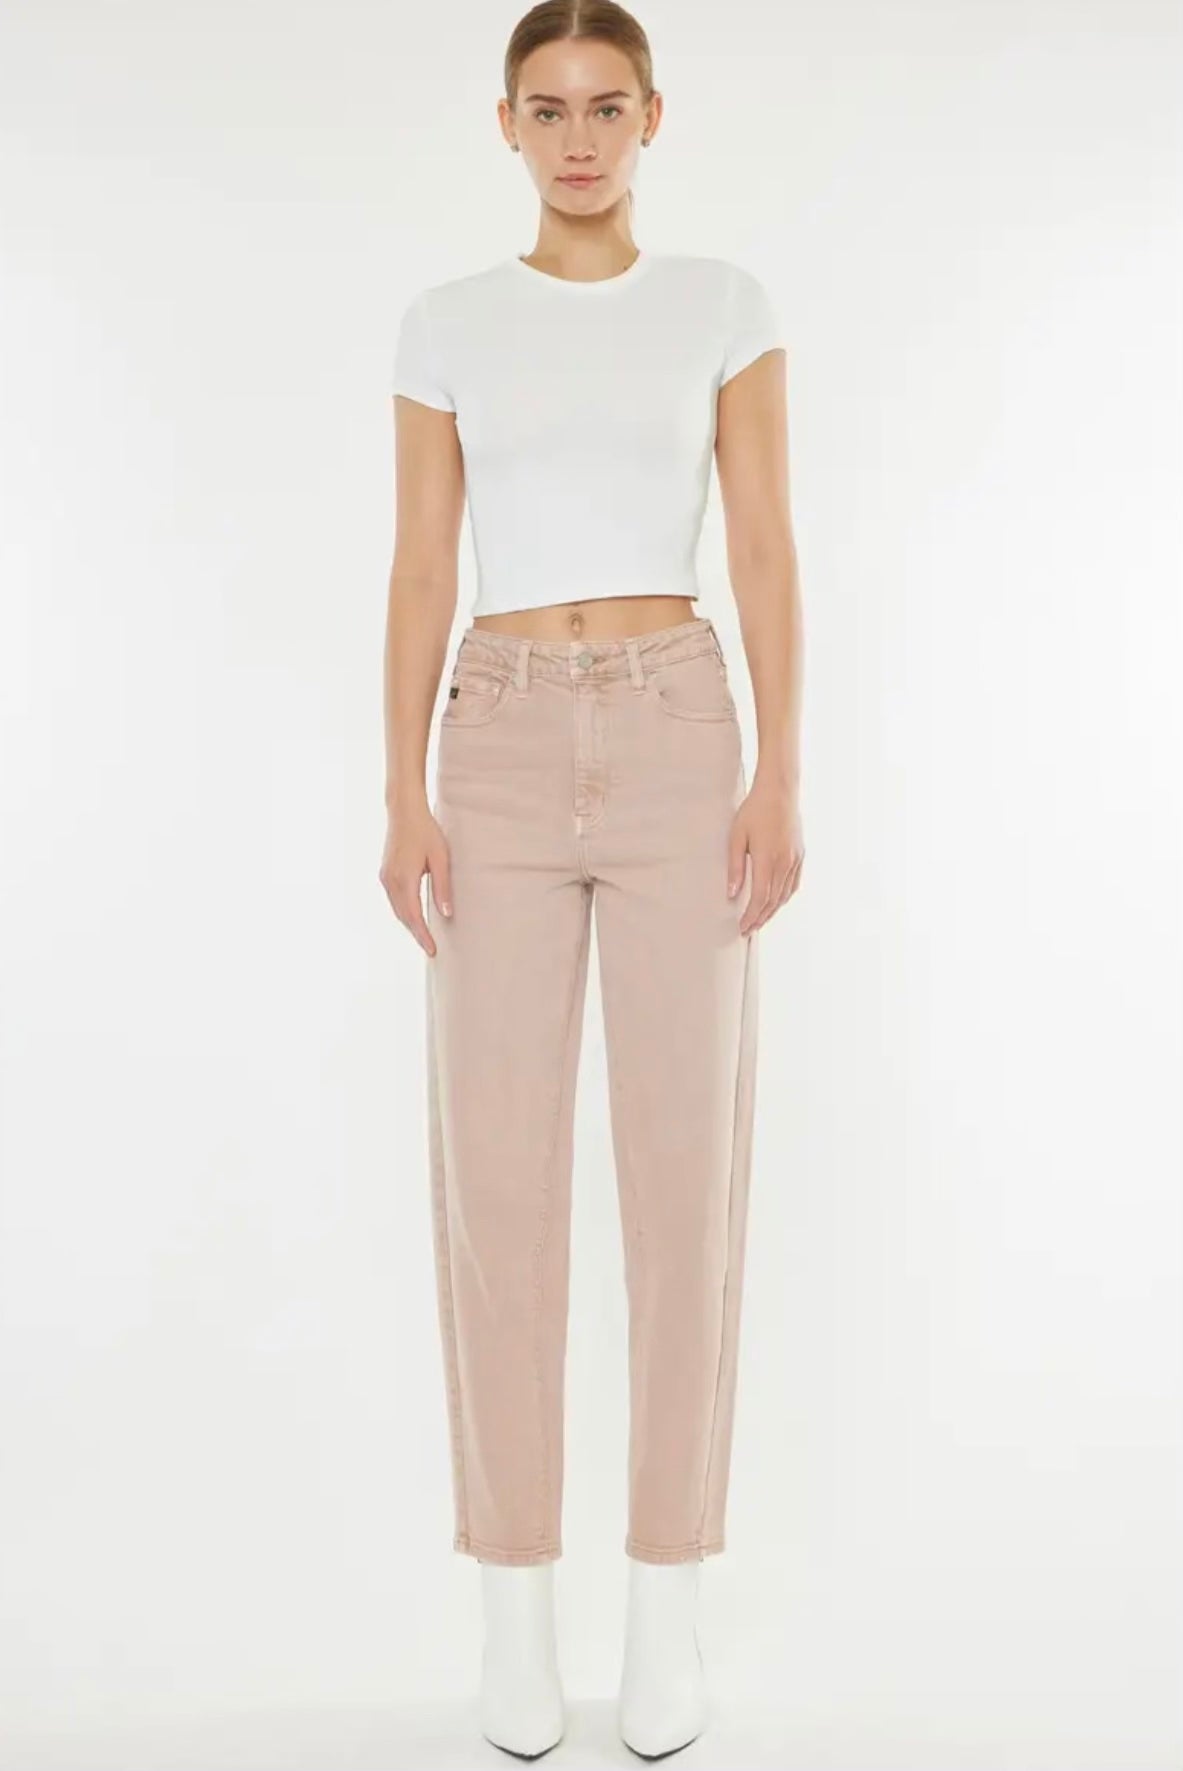 Dusty Rose Straight Pant